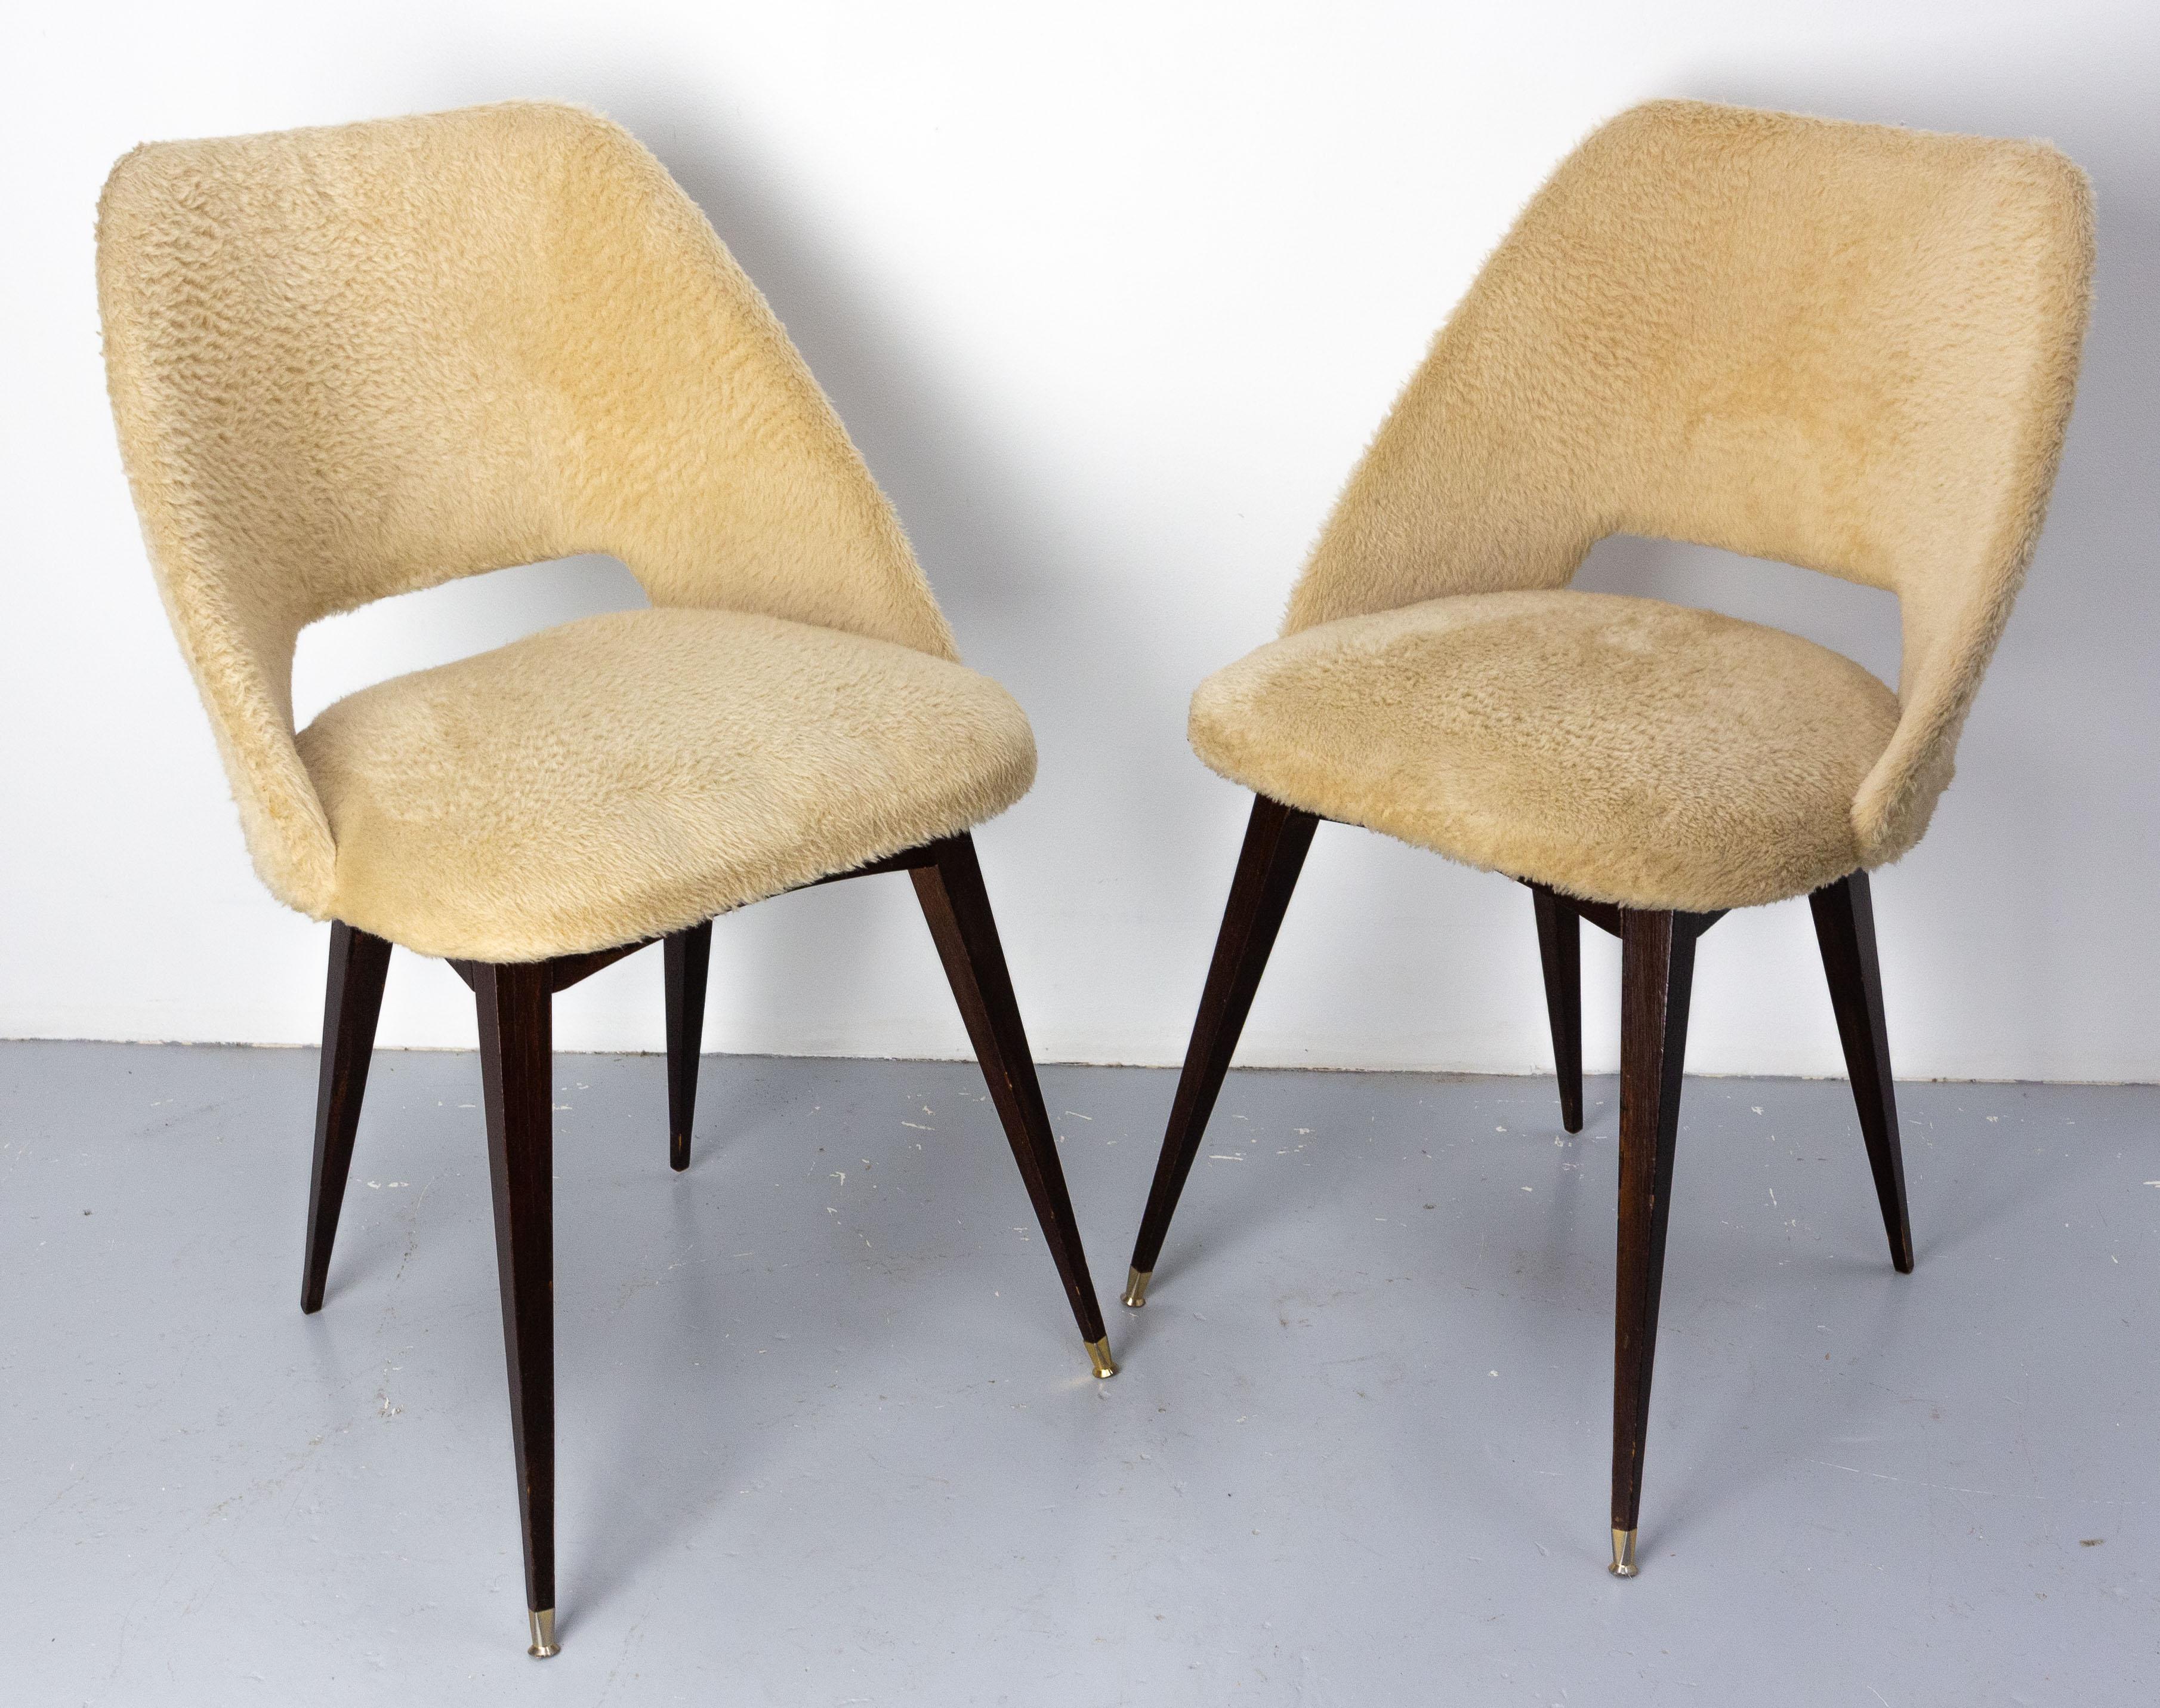 Two vintage chairs,
Very typical of the 1970s 
The fabric can be kept or it can be changed as you like.
Good condition

Shipping:
P51 H86 / l 47 cm 8.4 Kg. A dismounted foot.